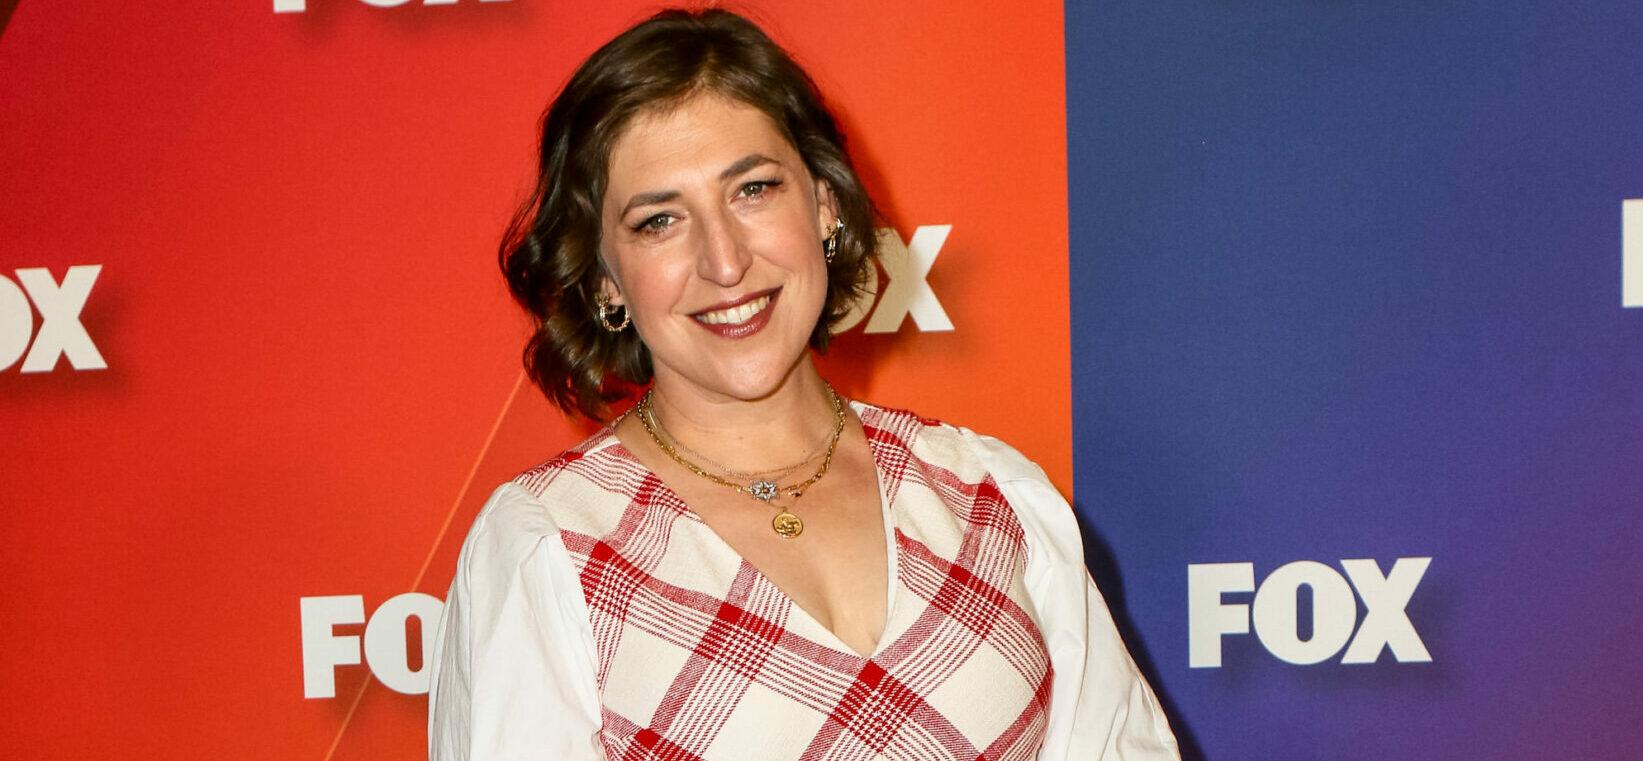 Mayim Bialik To Be Replaced As Host Of ‘Celebrity Jeopardy!’